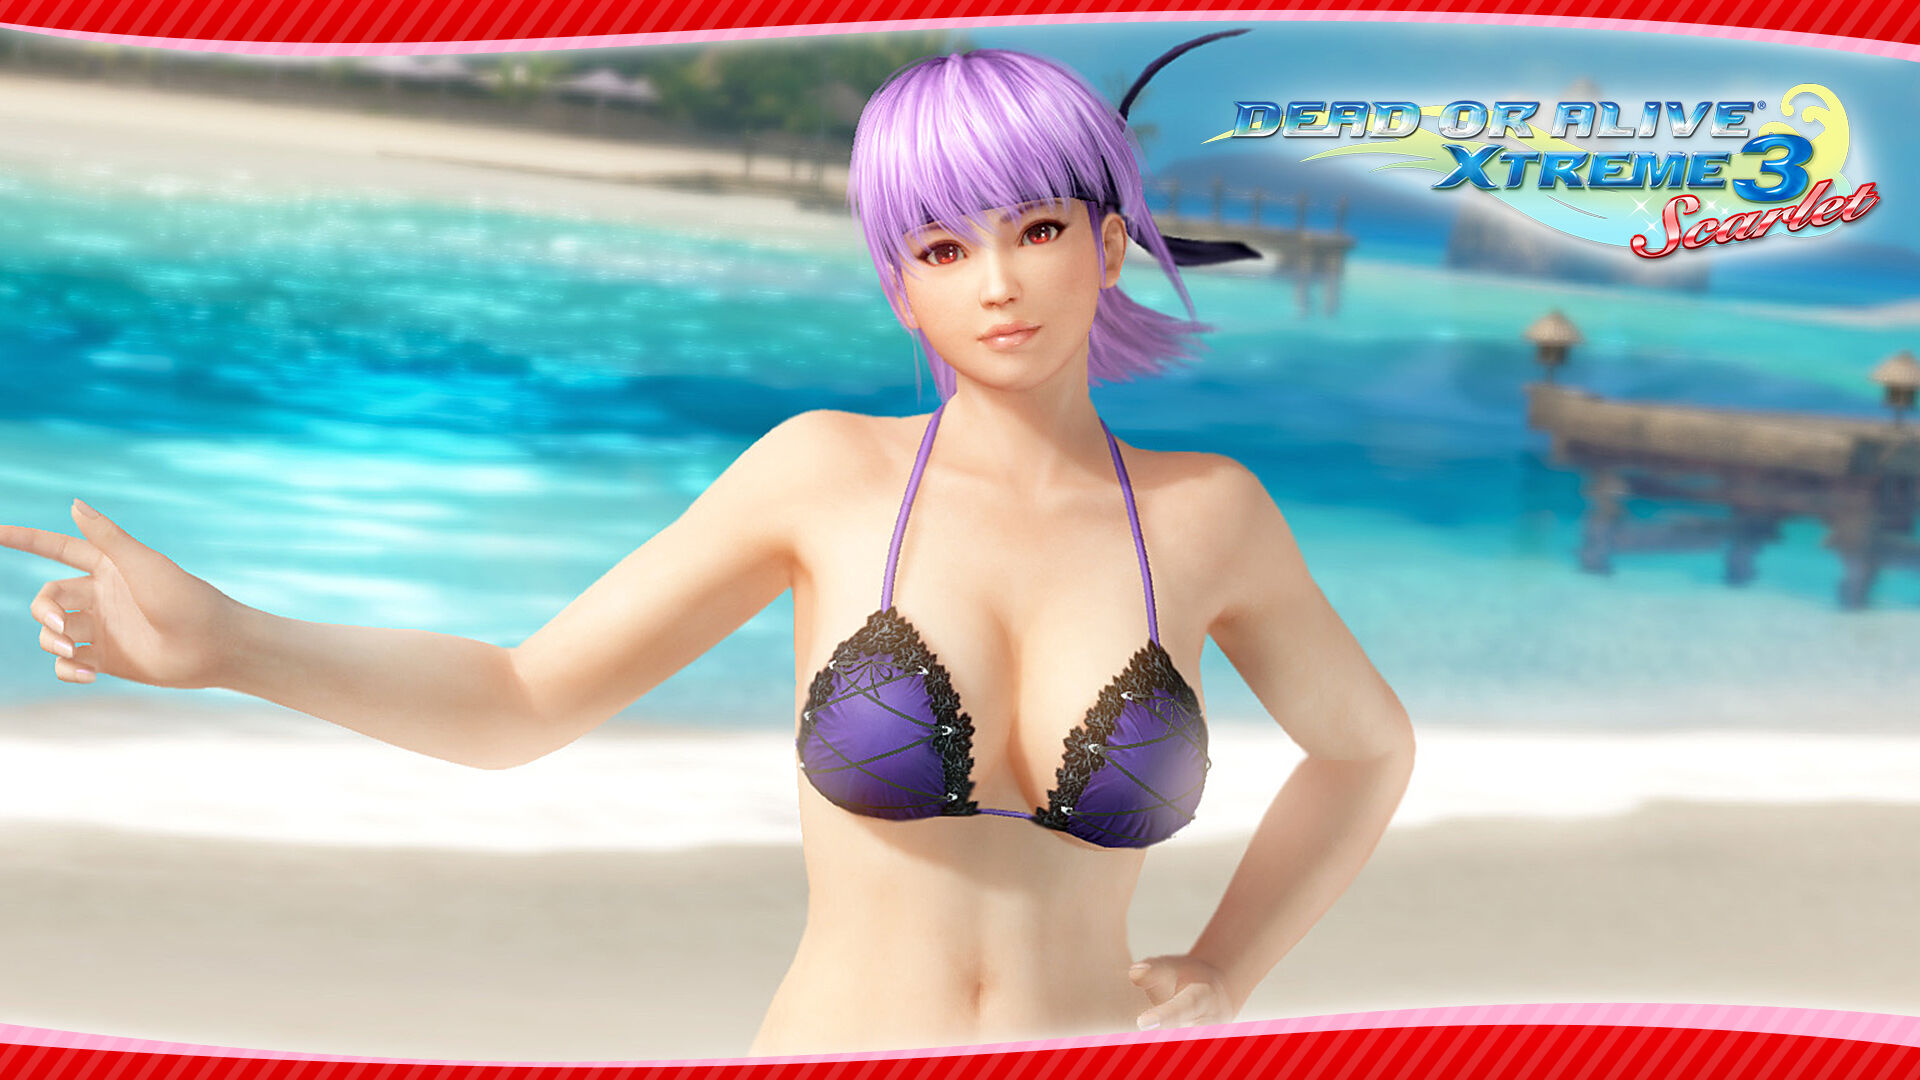 DEAD OR ALIVE Xtreme 3 Scarlet ダウンロード版 | My Nintendo Store 